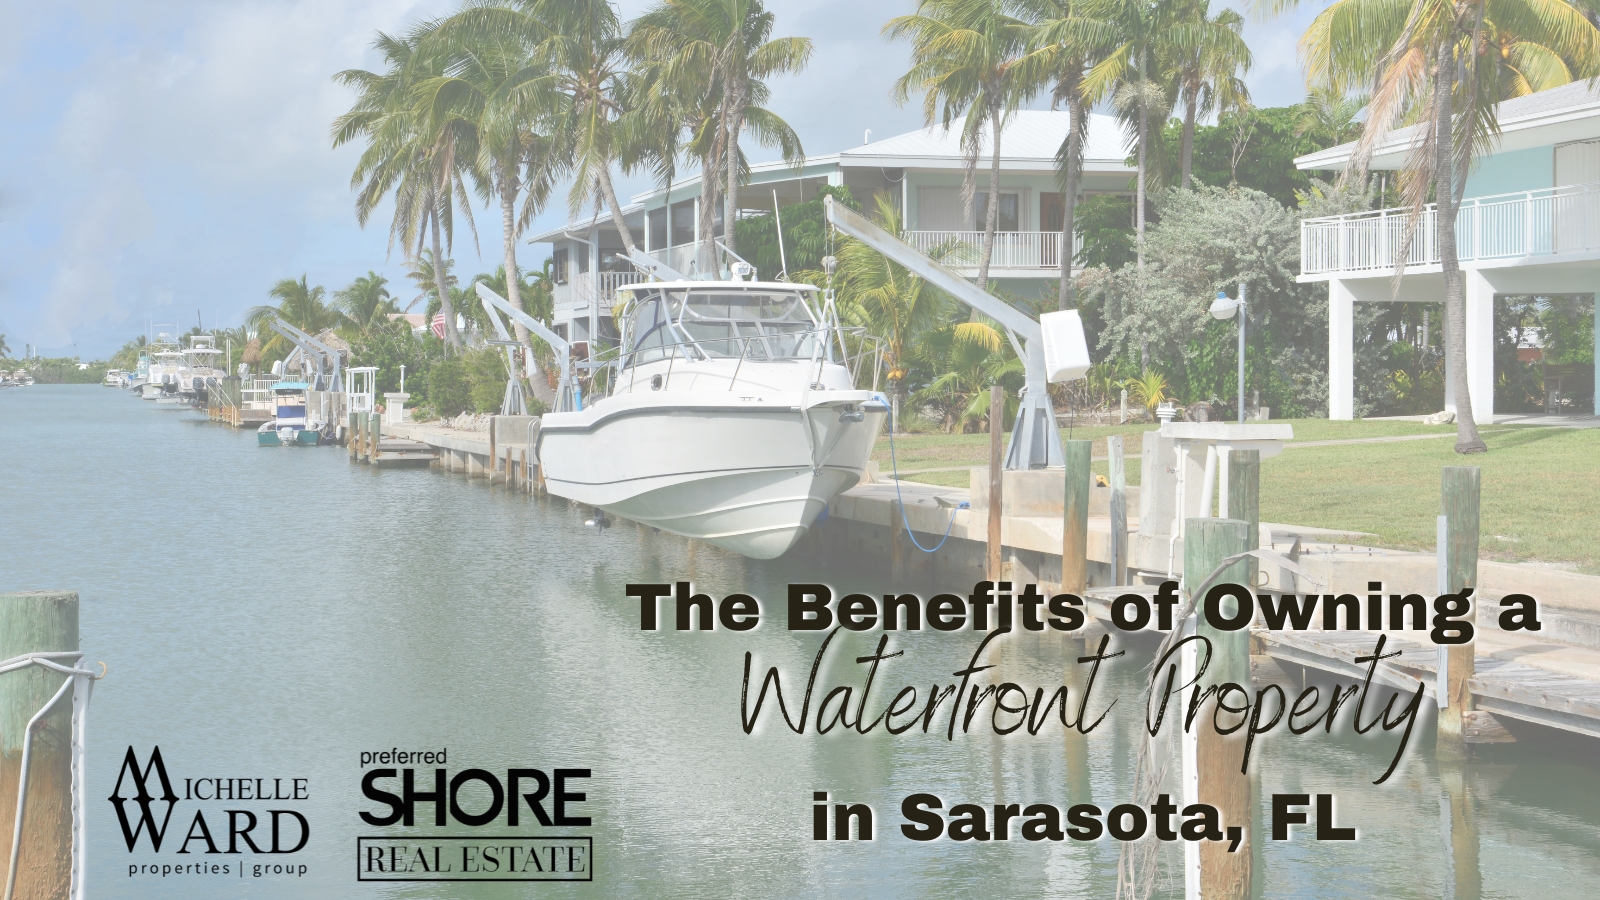 The Benefits of Owning a Waterfront Property in Sarasota, FL